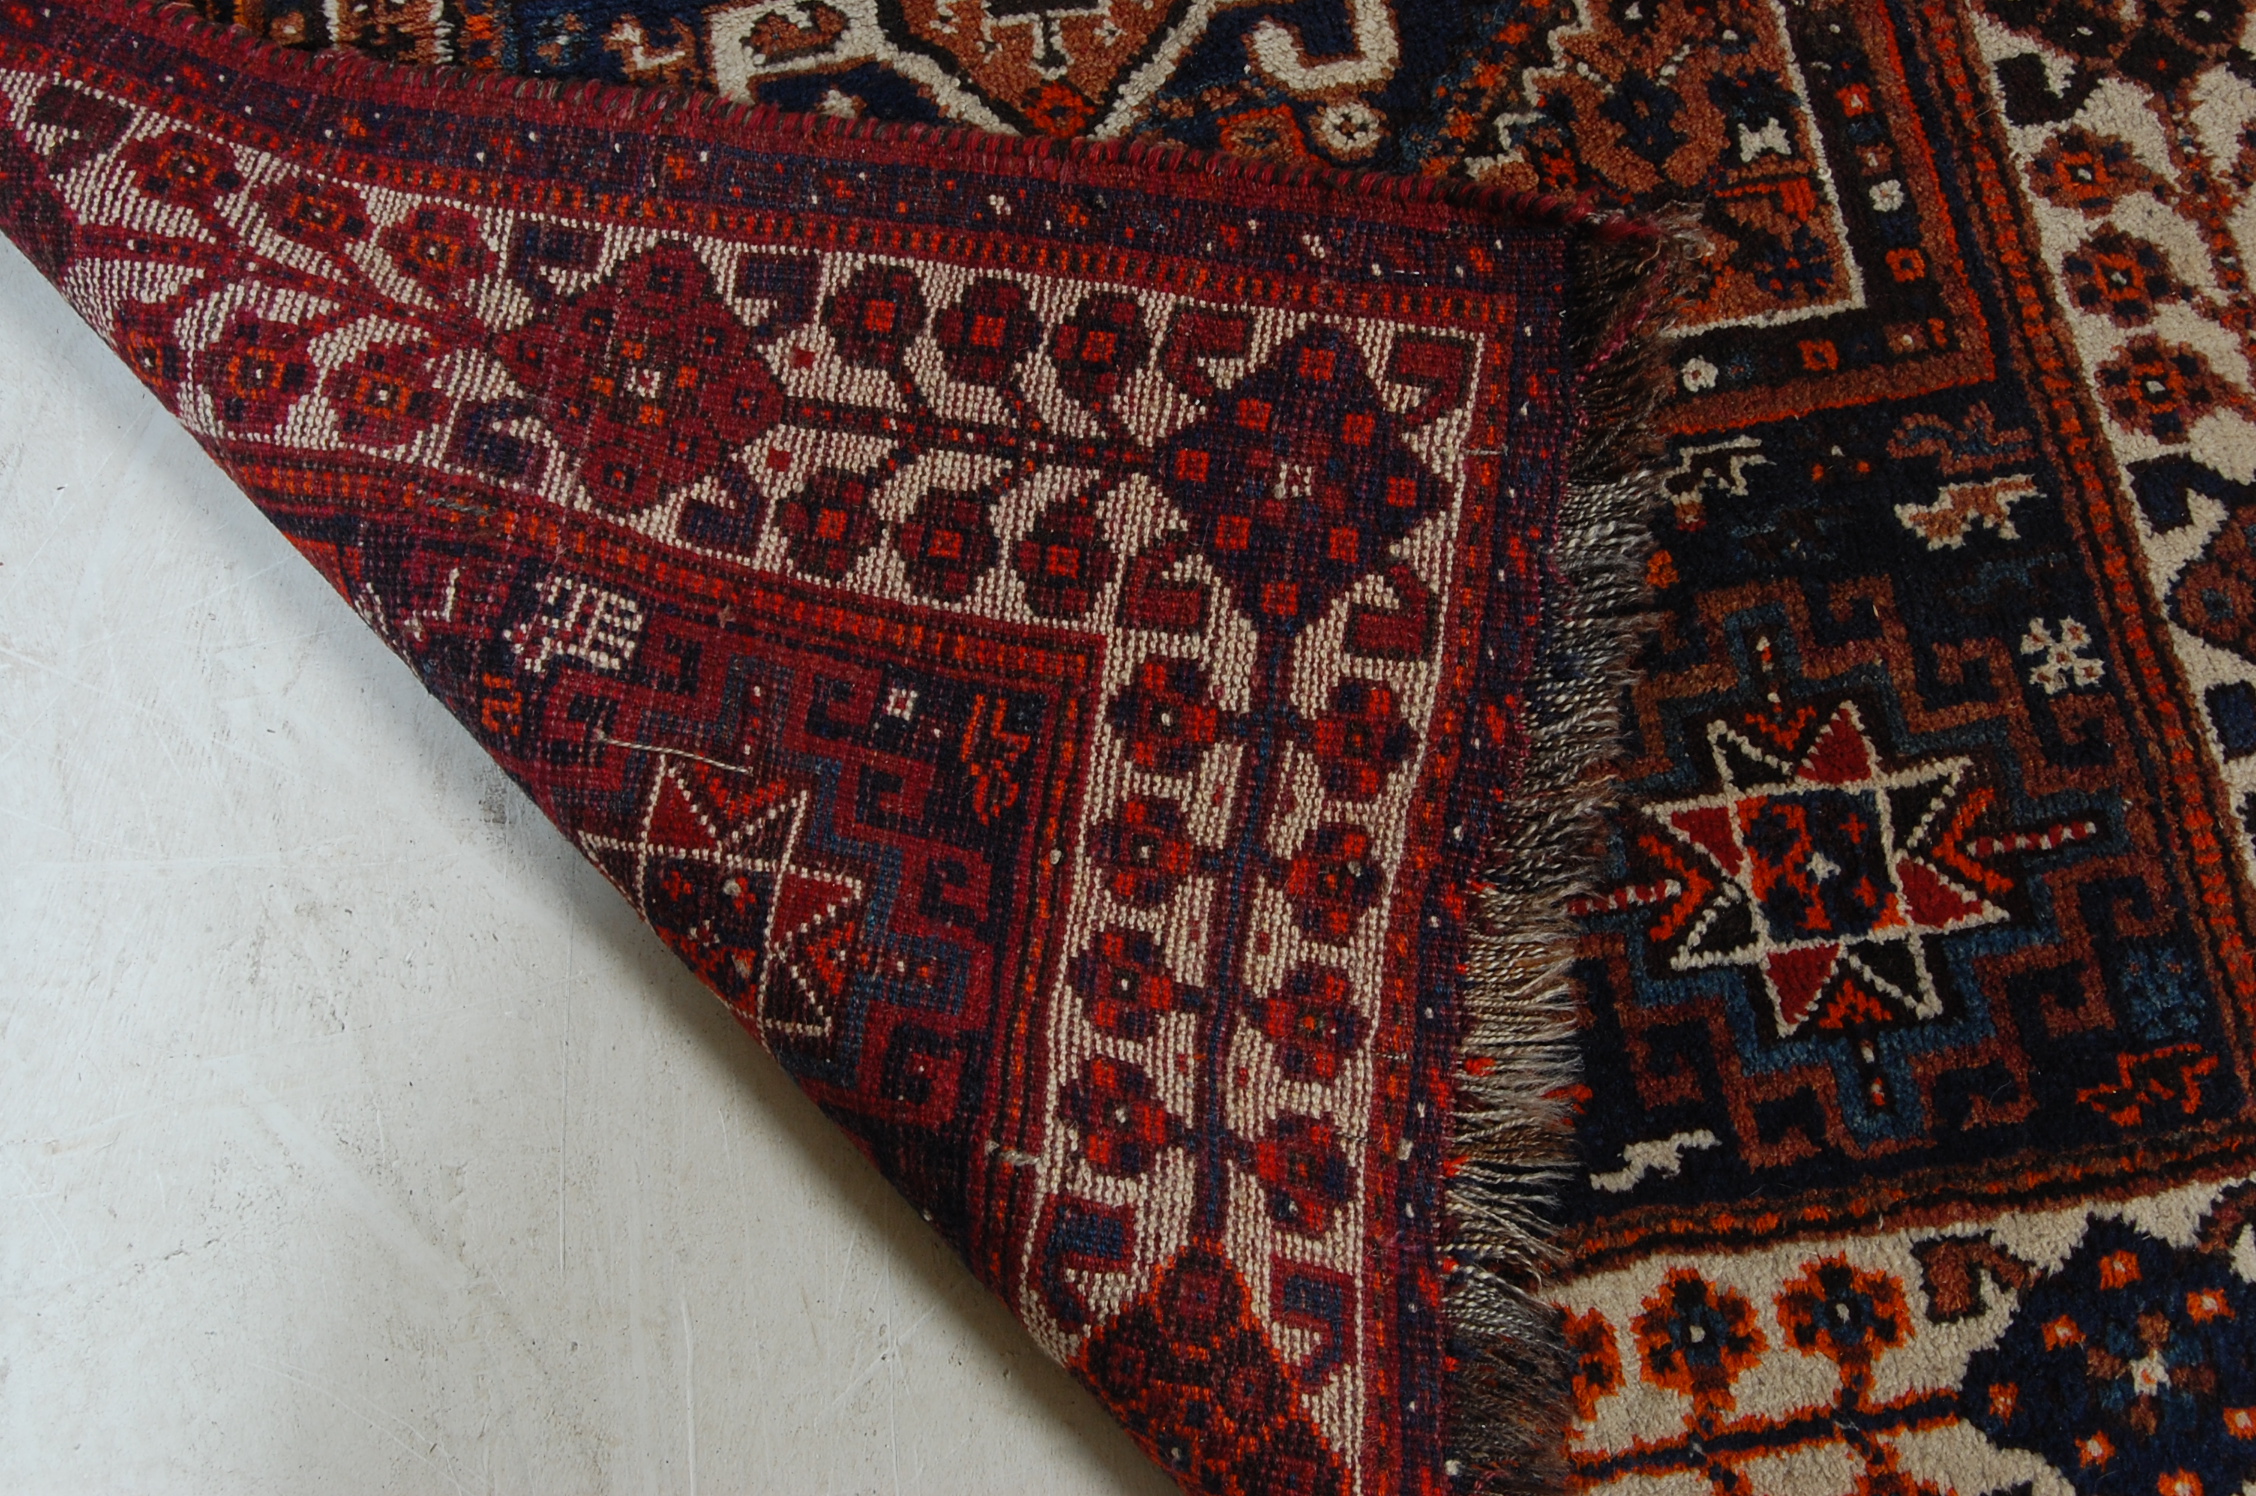 EARLY 20TH CENTURY NATURAL DYED AND HAND-WOVEN WOOL AFGHAN RUG / CARPET - Image 6 of 6